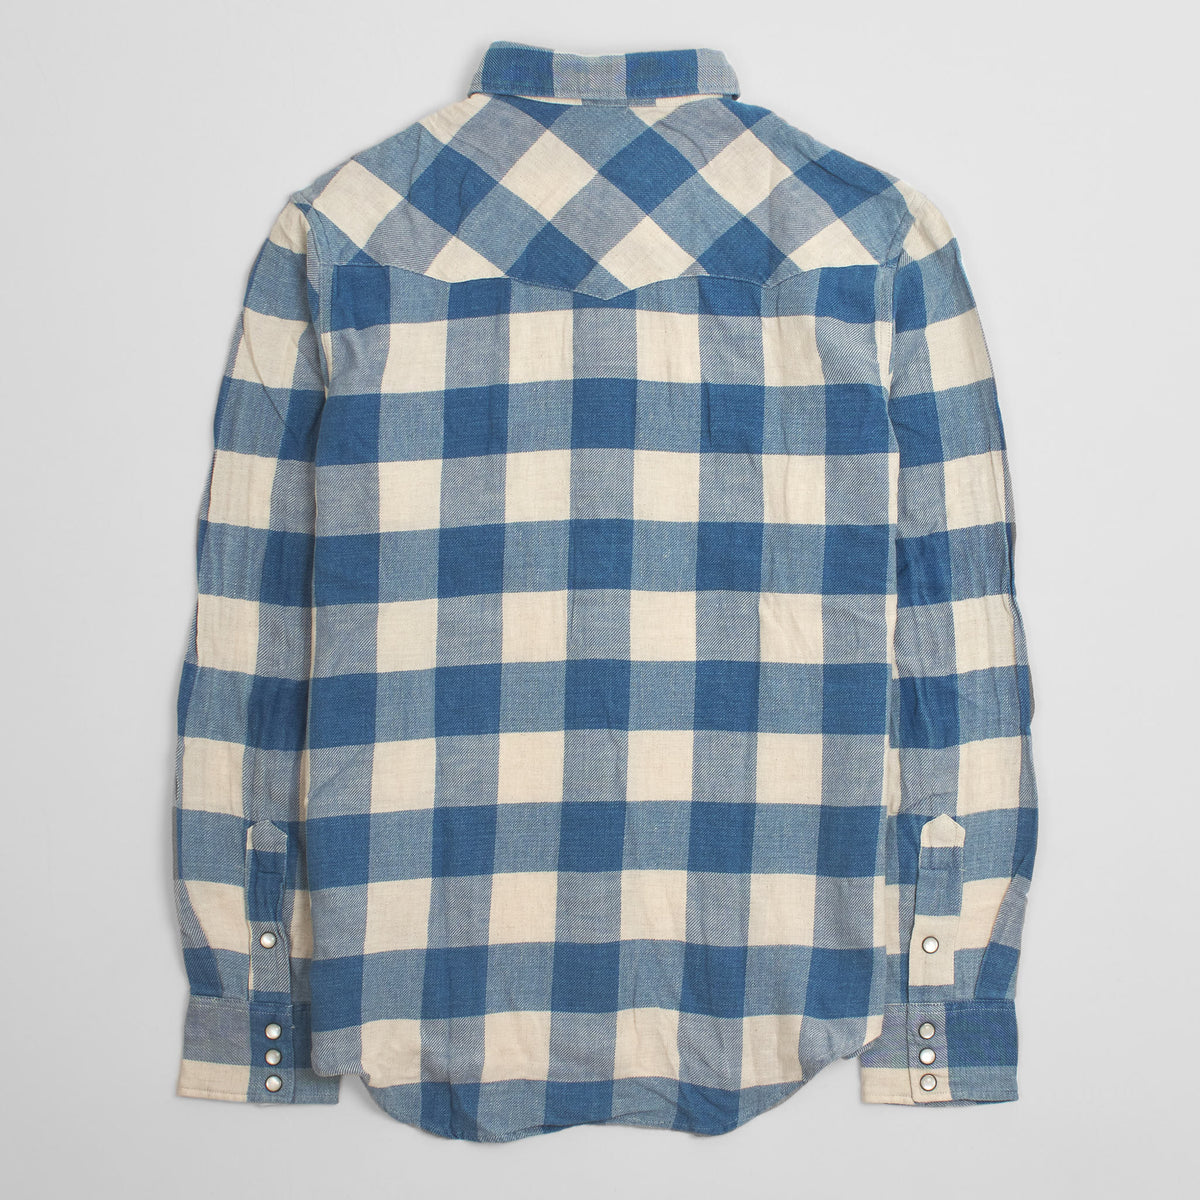 DoubleRL Western check shirt.